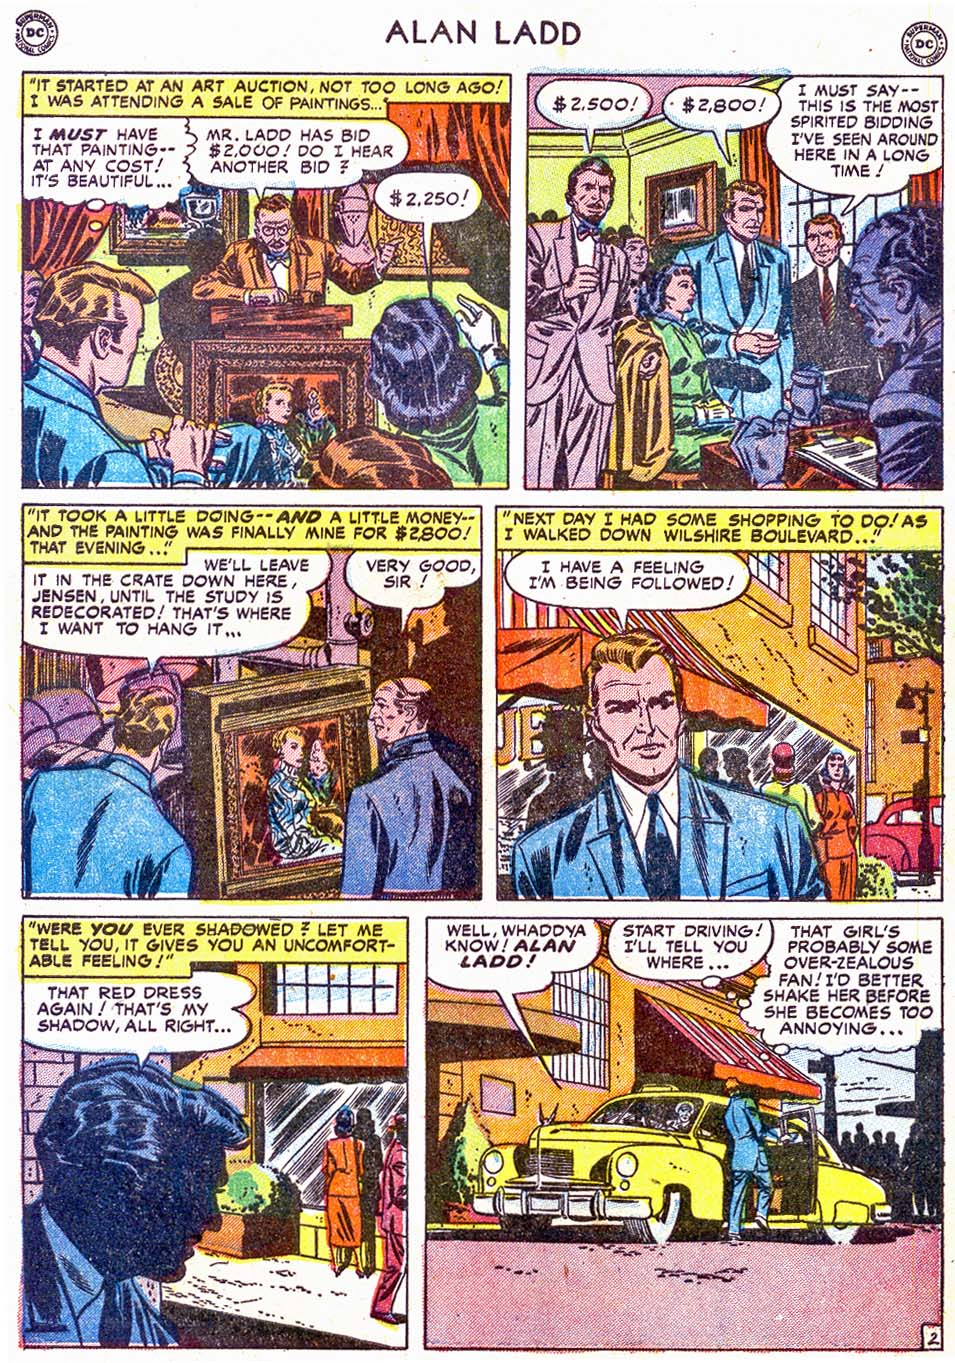 Read online Adventures of Alan Ladd comic -  Issue #6 - 4